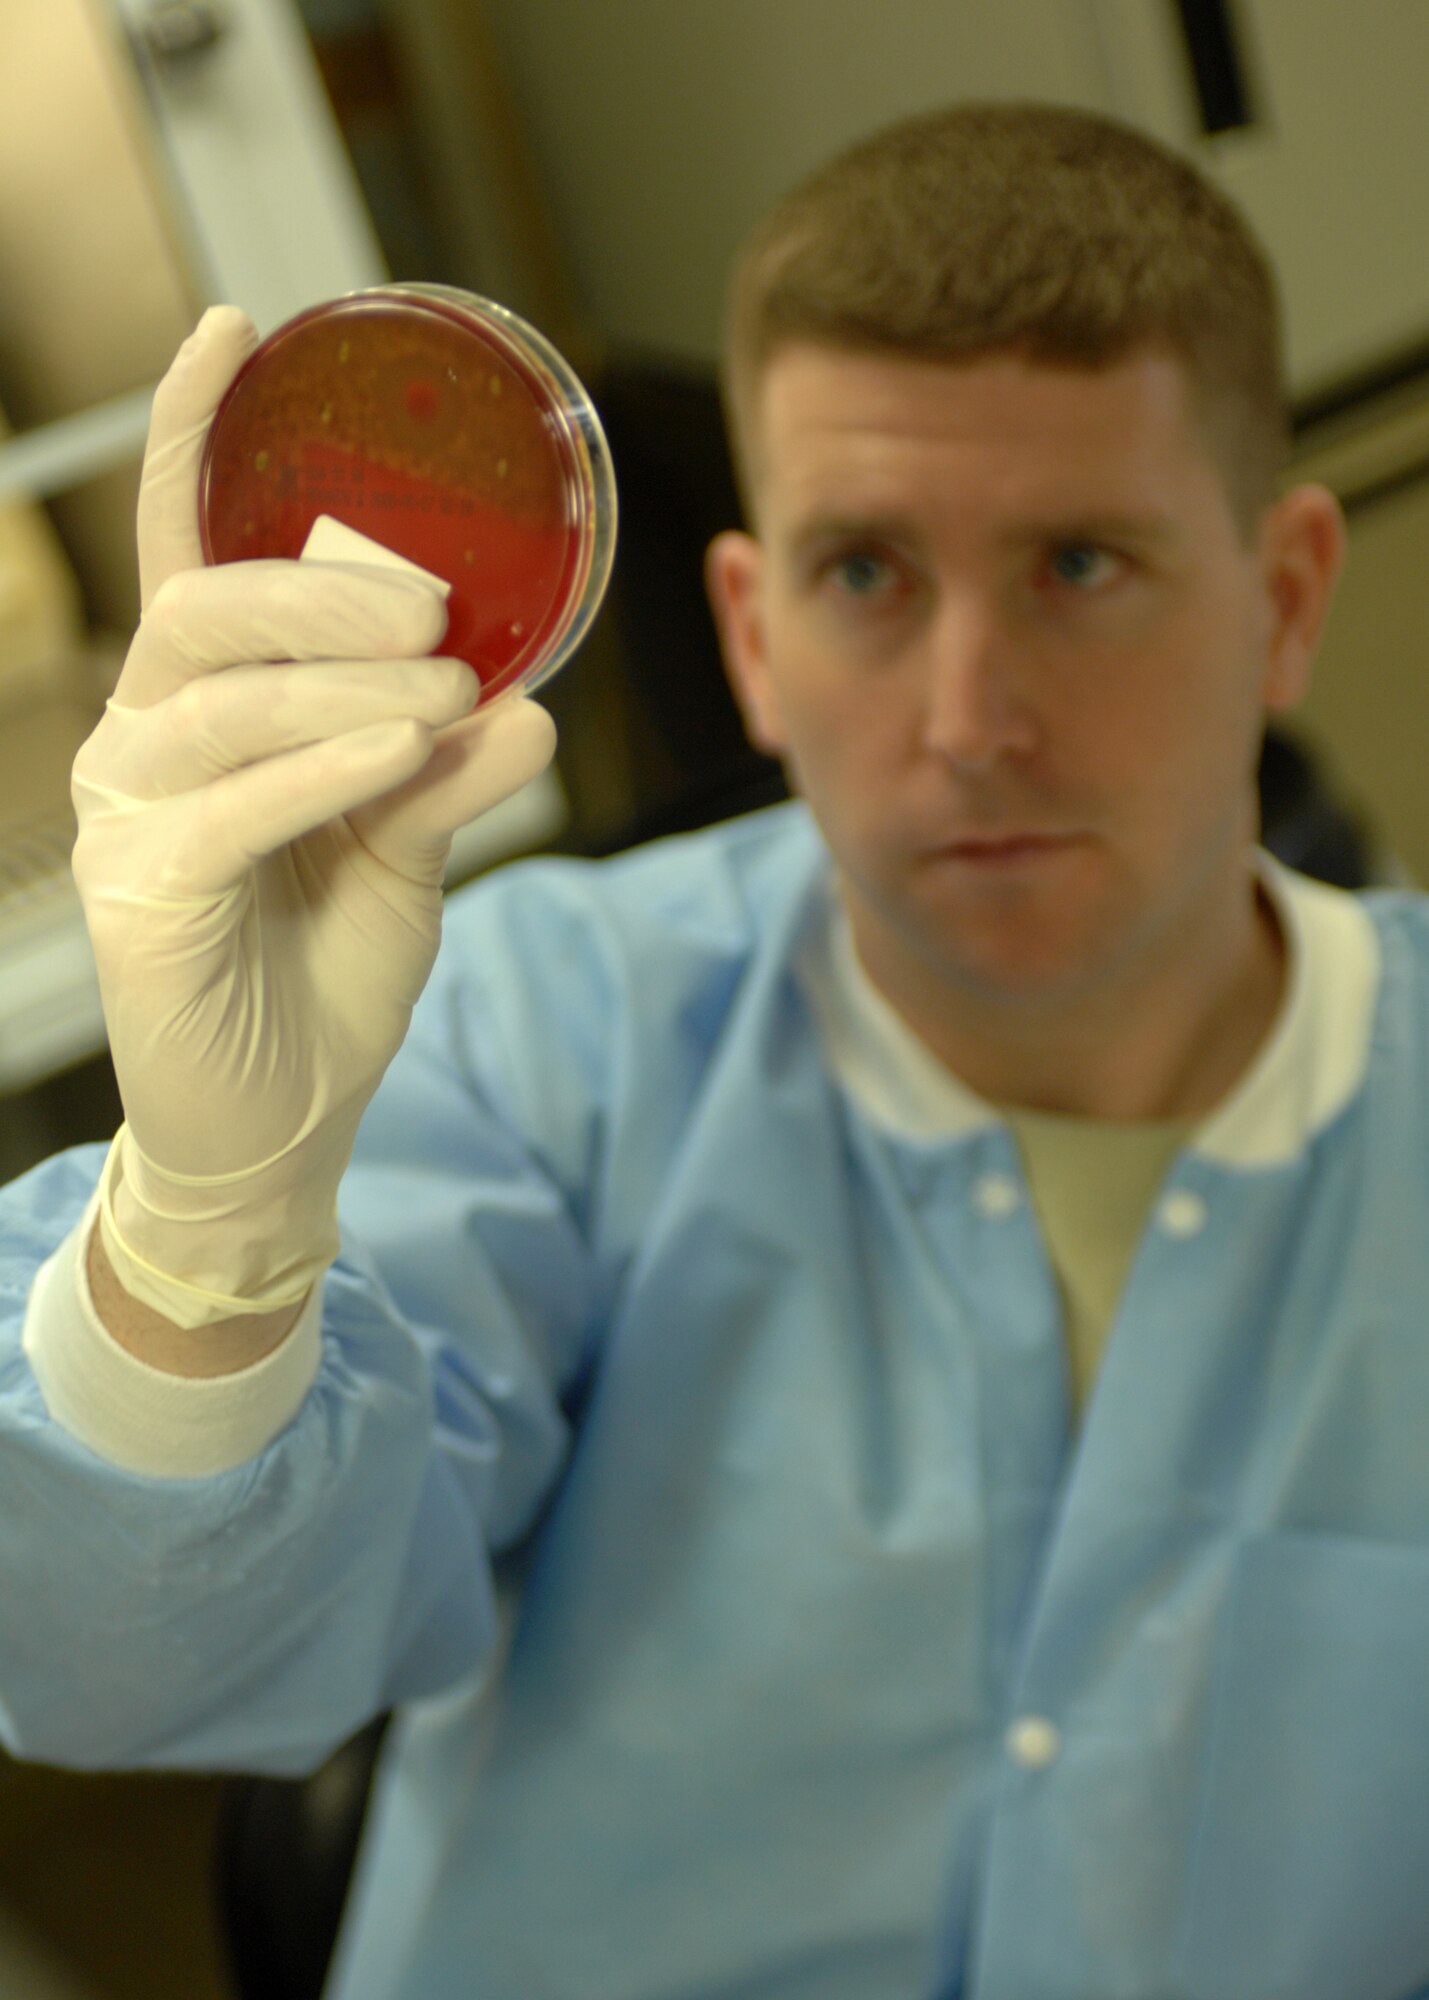 BITBURG AIR BASE, Germany- Senior Airman Justin Hamilton, 52nd Medical Support Squadron, analyzes a bacteria sample the Bitburg Laboratory April 15, 2008. By testing and analyzing different bodily materials, doctors are able to find out much sooner how to help patients. (U.S. Air Force photo/Airman 1st Class Jenifer Calhoun)